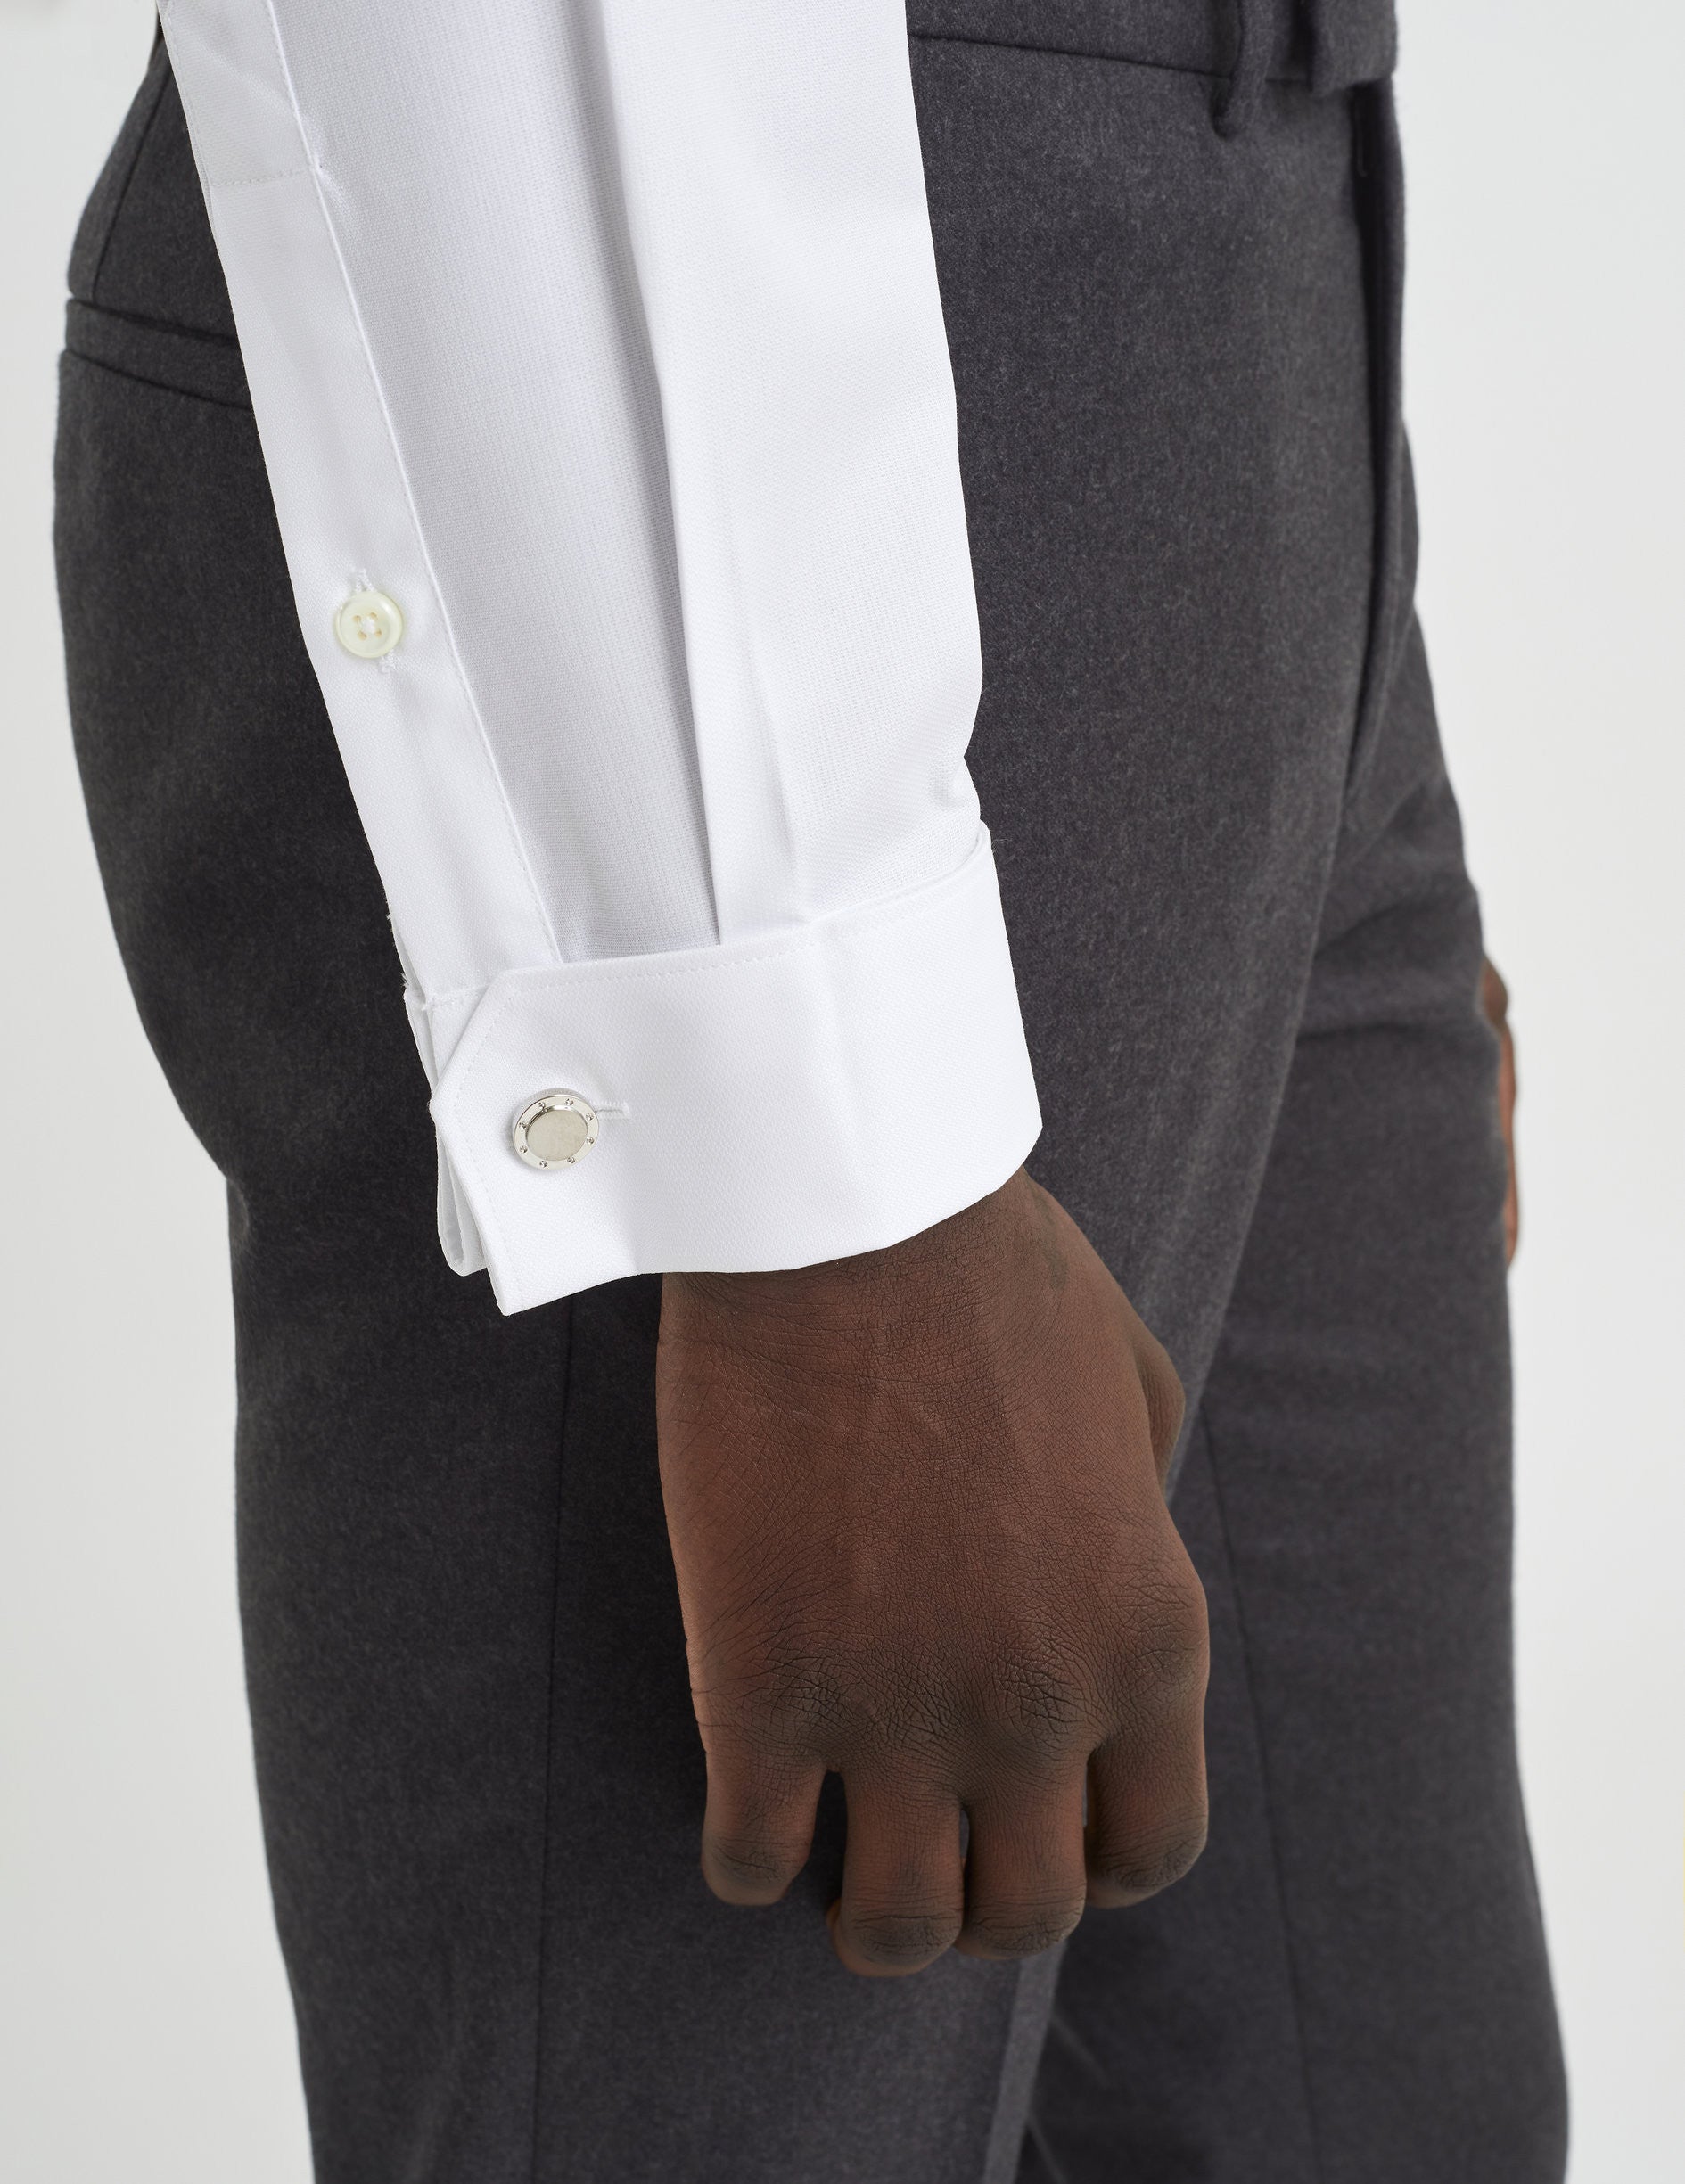 Semi-fitted white shirt - fashioned - Figaret Collar - French Cuffs